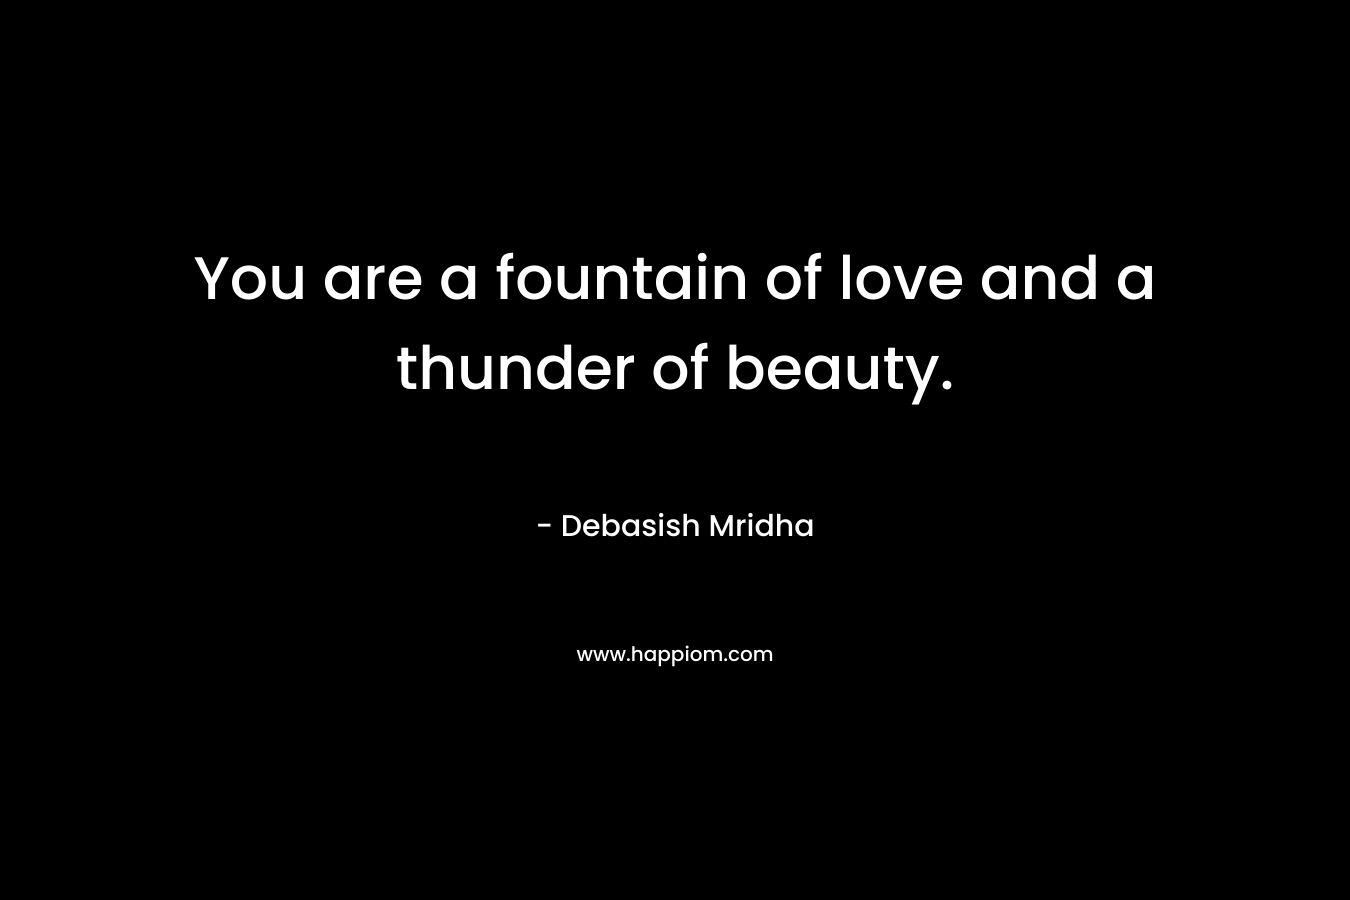 You are a fountain of love and a thunder of beauty.